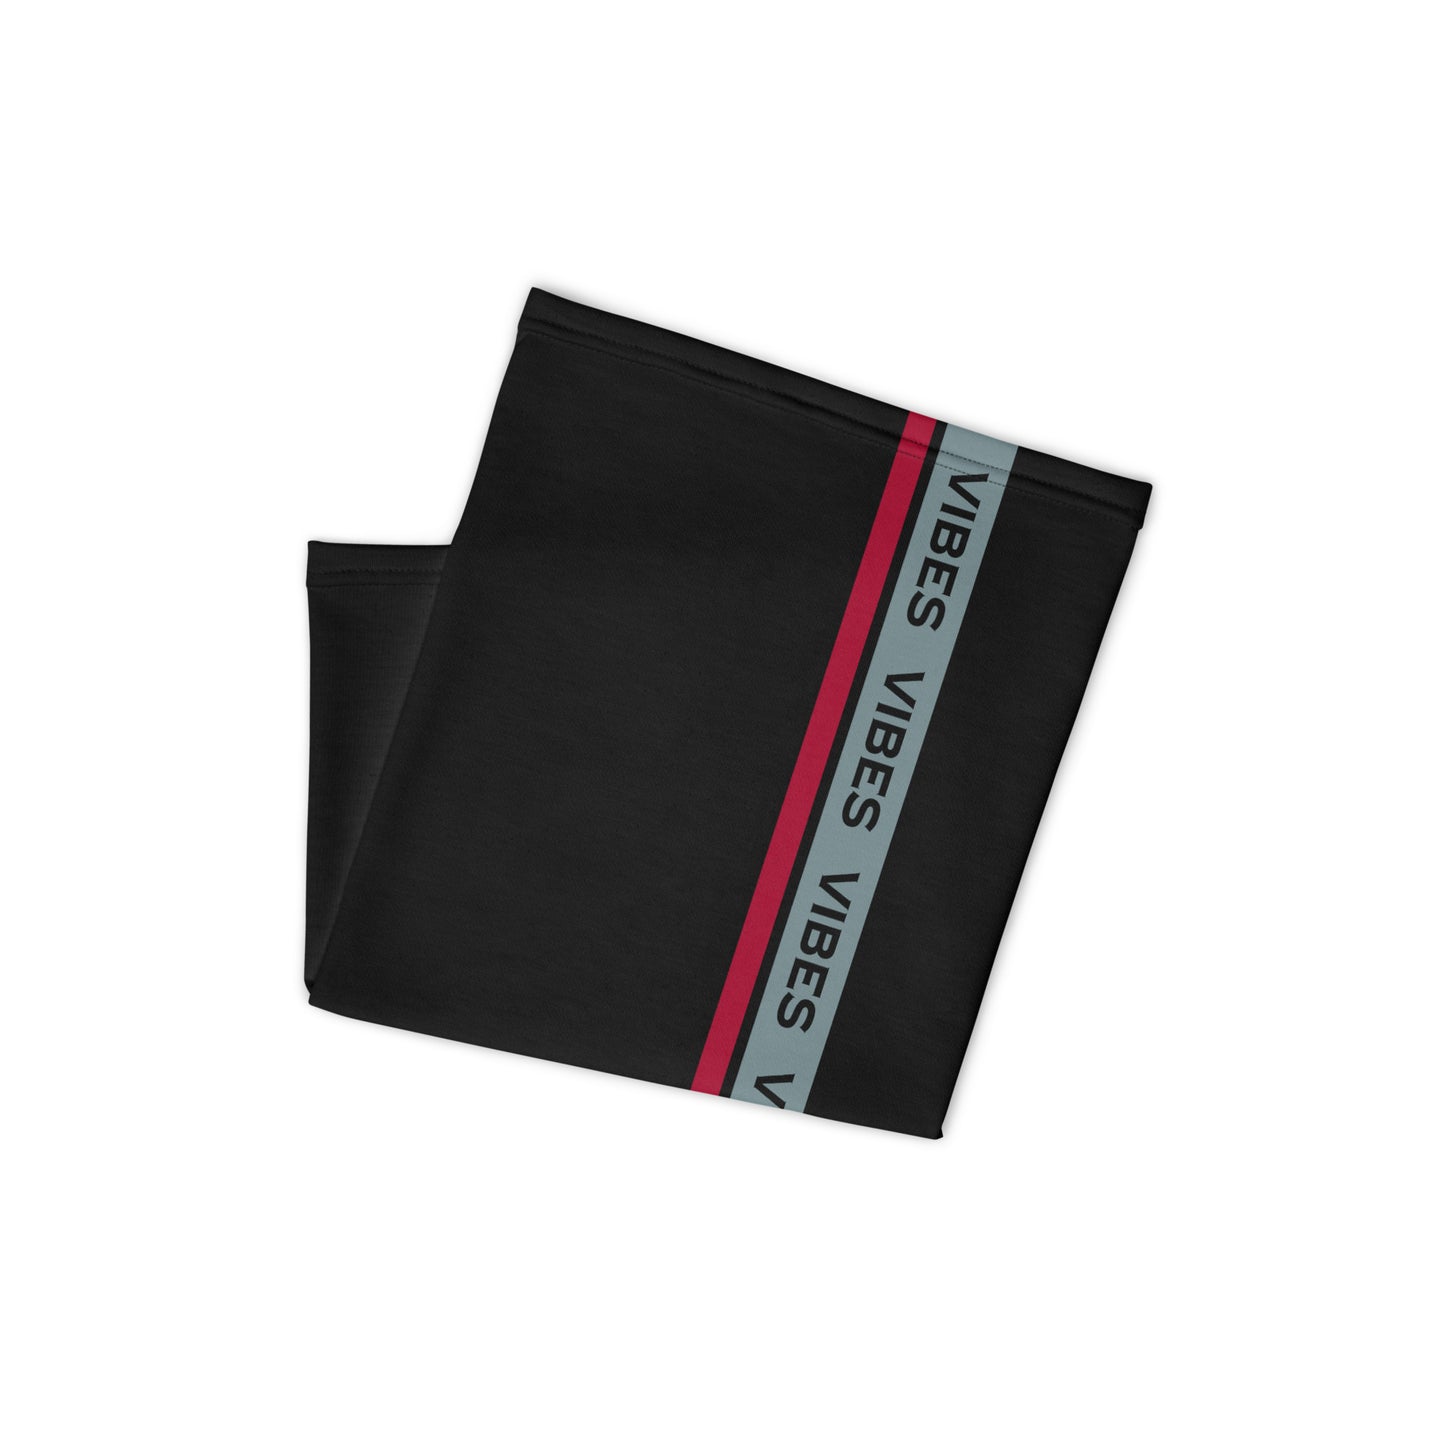 TIME OF VIBES - Bandana VIBES (Black/Gothicblue/Red) - €26.00